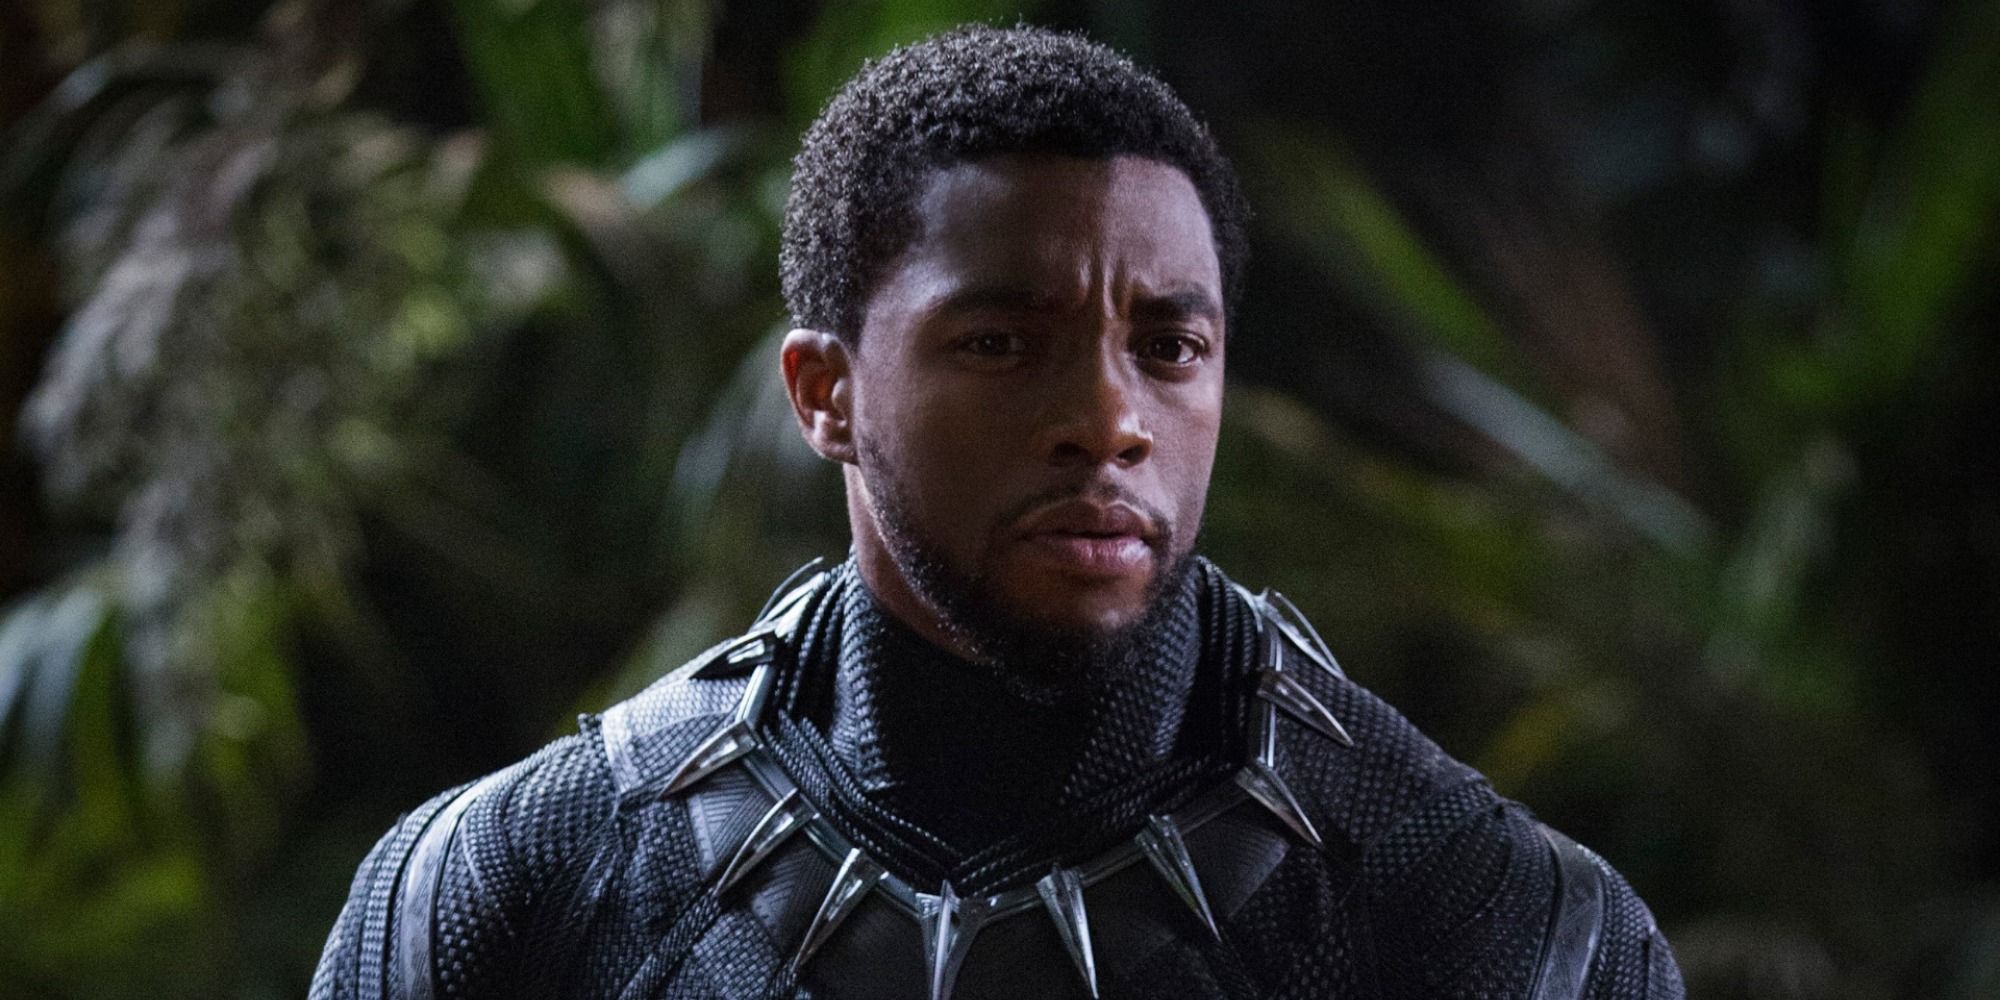 Chadwick Boseman's T'Challa during his rescue mission for Nakia in Black Panther